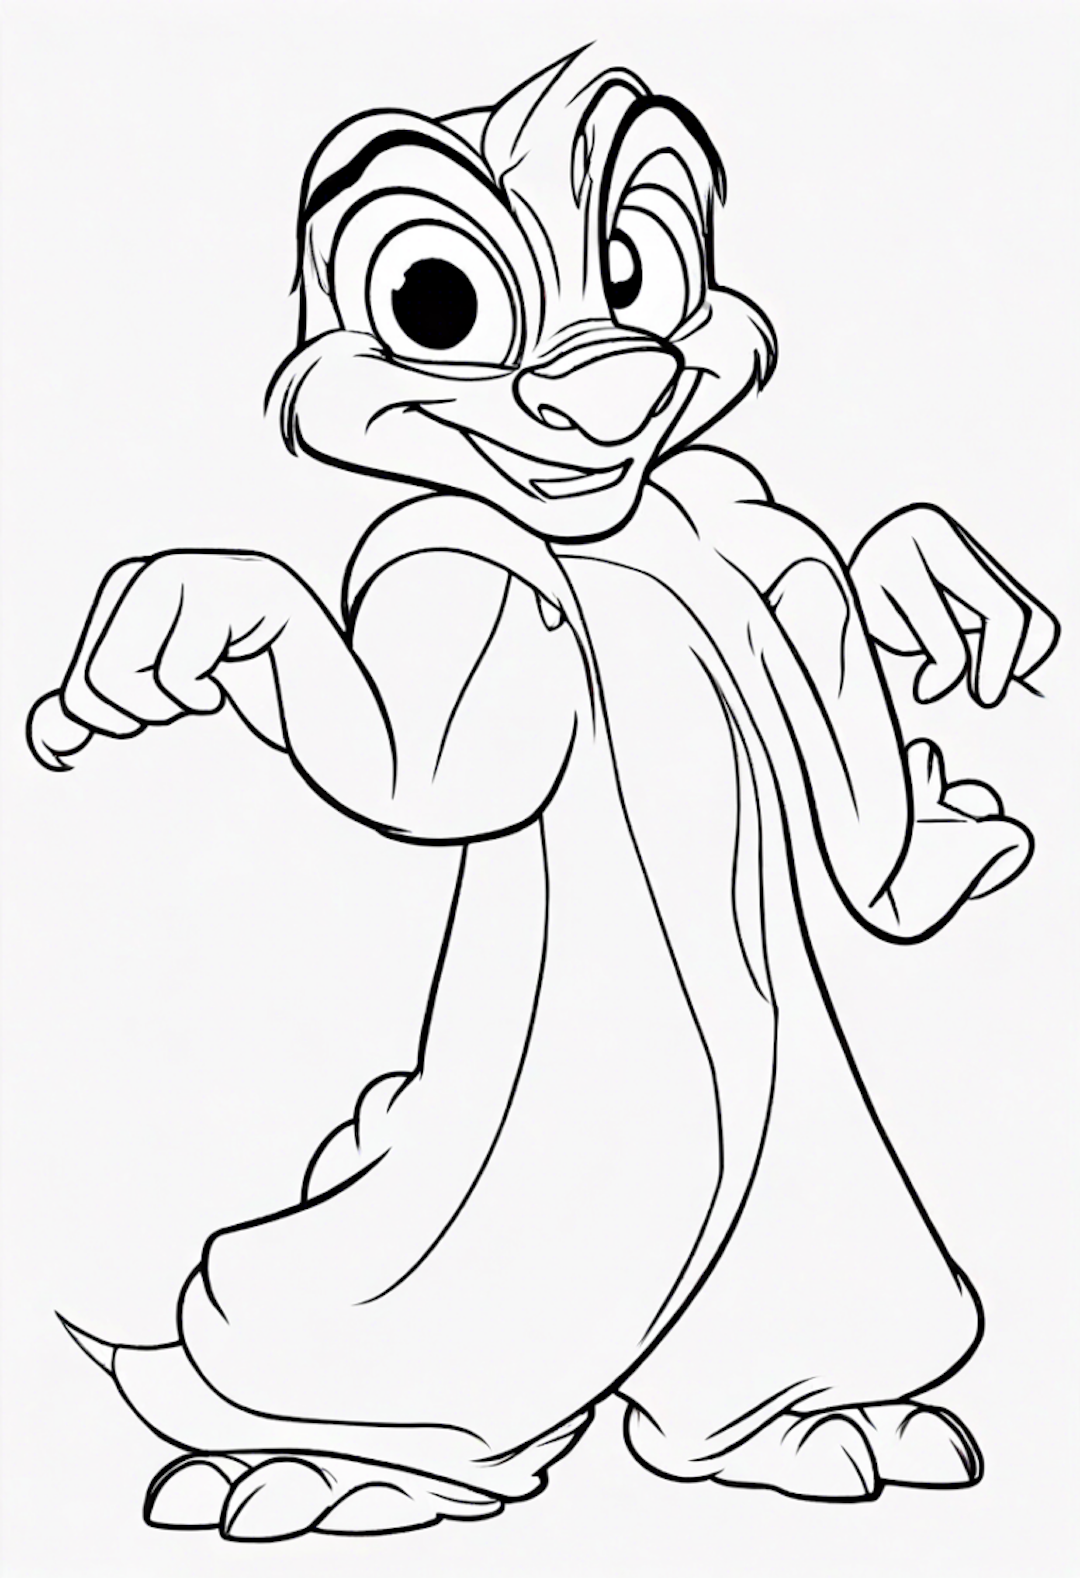 Timon in a Playful Pose Coloring Page coloring pages